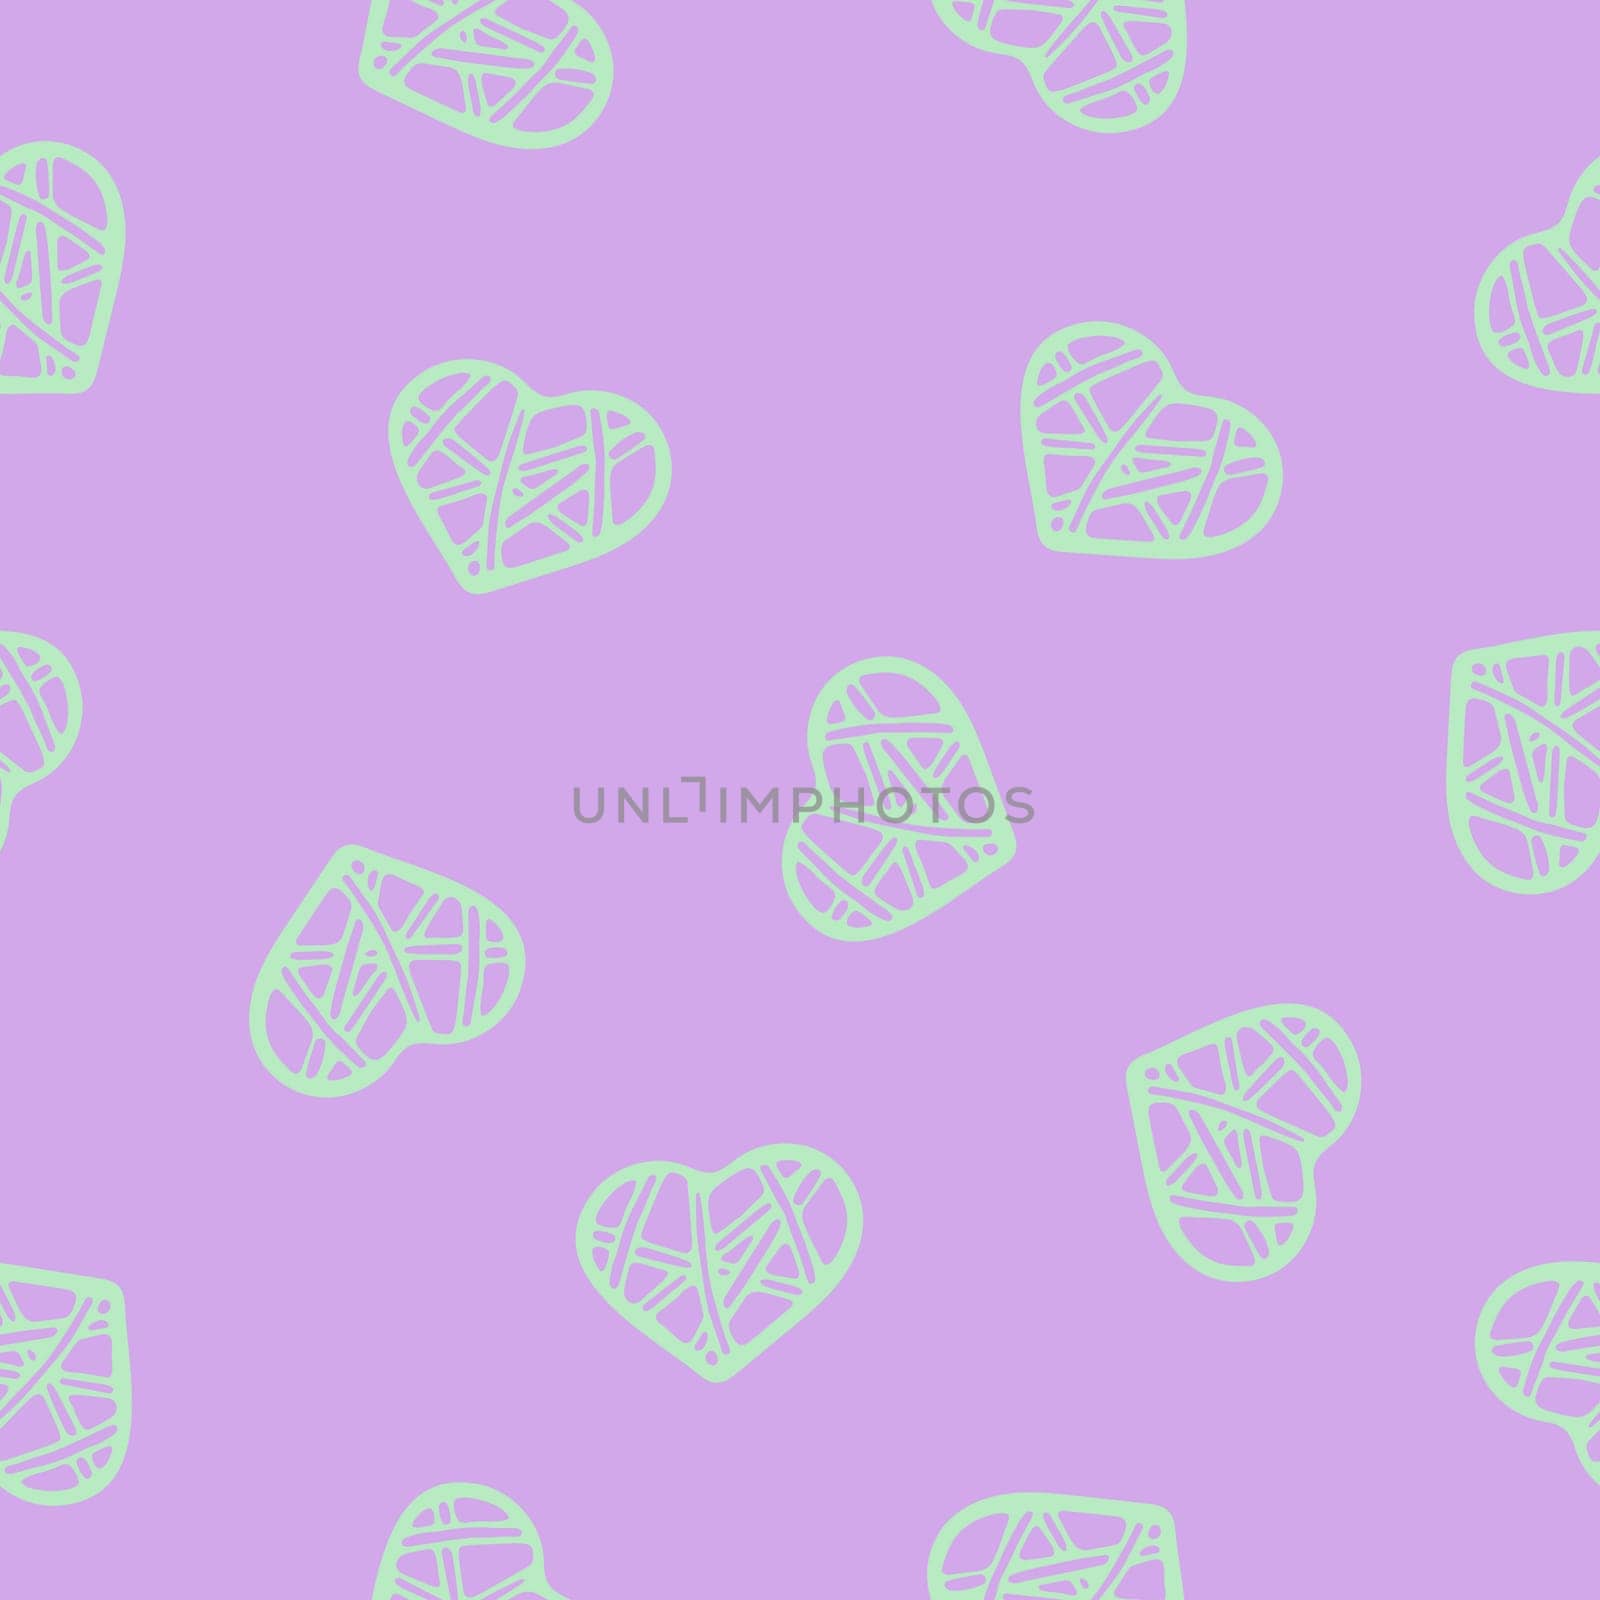 Hand Drawn Seamless Patterns with Hearts in Doodle Style. Romantic Love Digital Paper for Valentines Day. Colorful Hearts on Pastel Lavender Background.